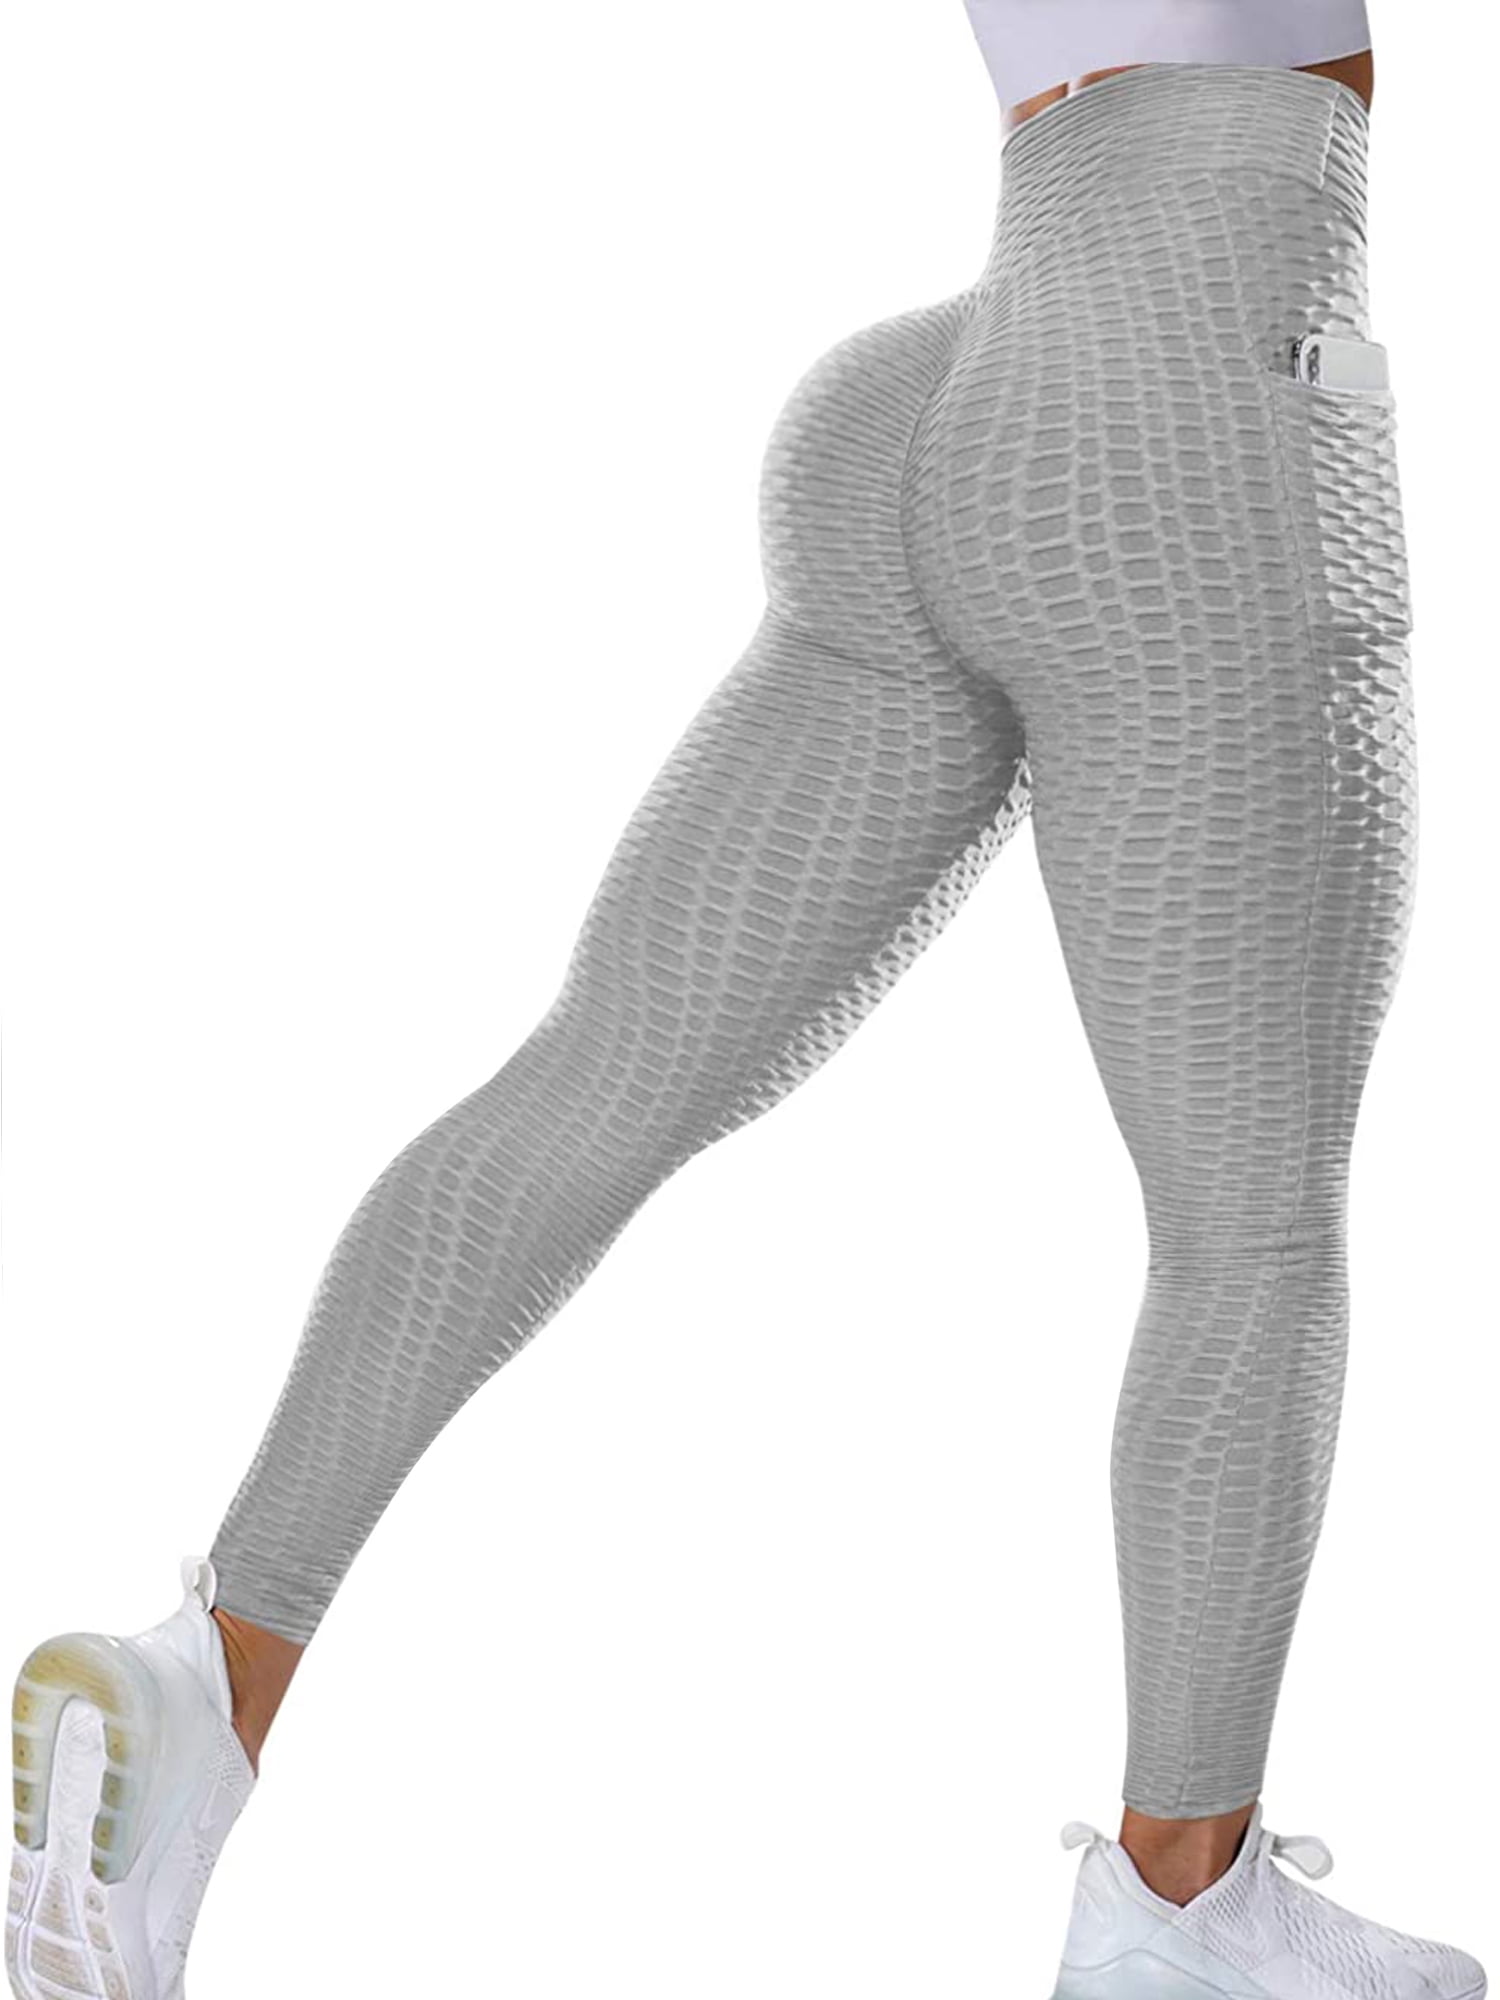 Black Butt Lift Open Buttocks Fishnet Tights One Size Fits All 